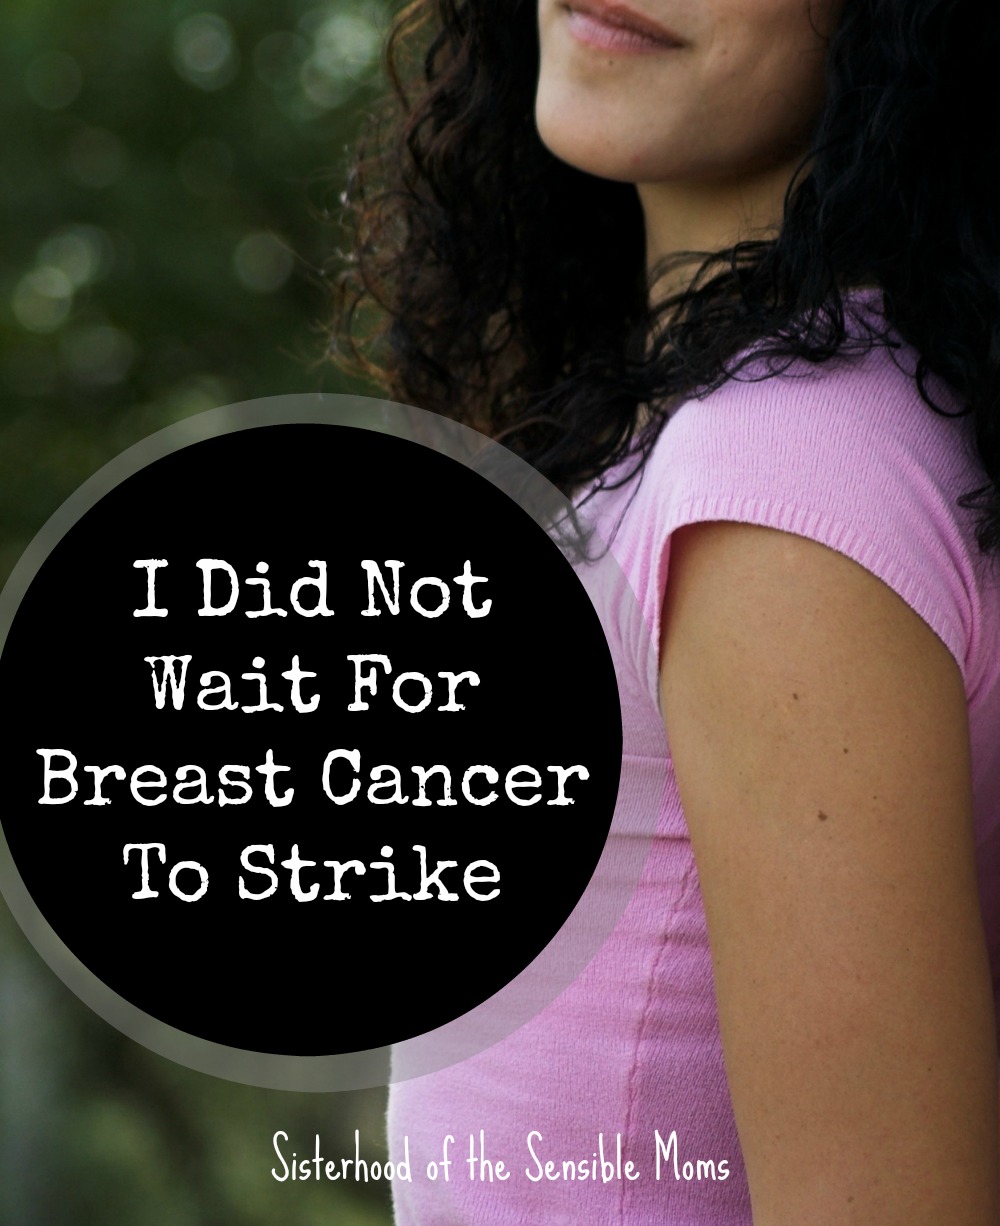 "I Did Not Wait for Breast Cancer to Strike." Mary's mother died from breast cancer, and she subsequently tested positive for the BRCA gene. By getting a prophylactic mastectomies she did not wait for breast cancer to strike. This is an important story of health, wellness, and breast cancer awareness. | Sisterhood of the Sensible Moms